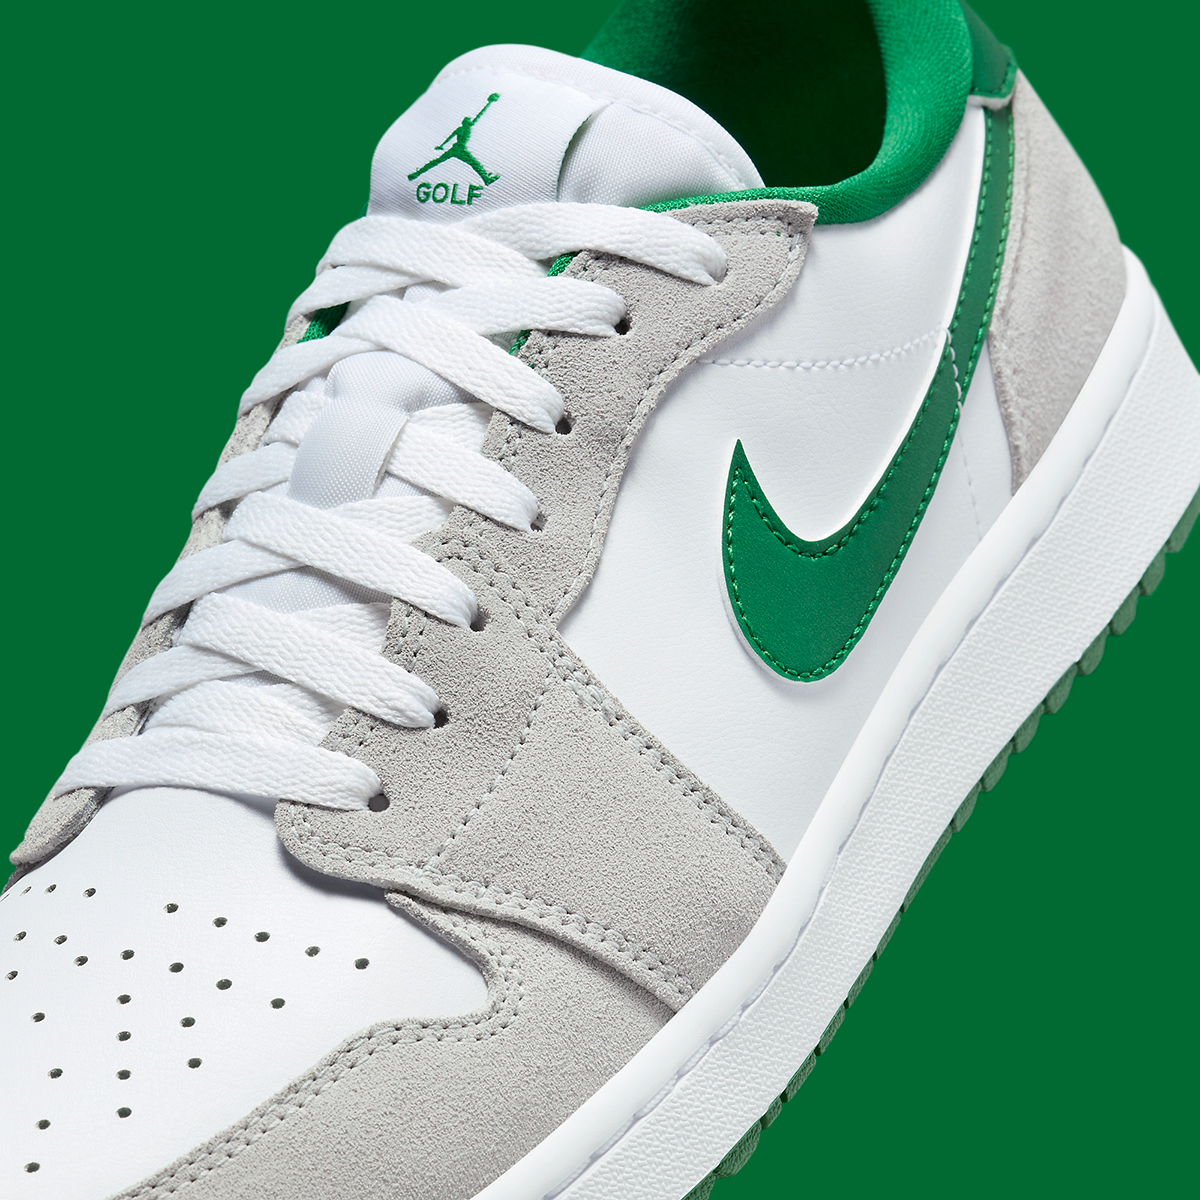 Official images of this Air Jordan 1 Mid have been added ahead Golf White Pine Green Light Smoke Grey Dd9315 112 7